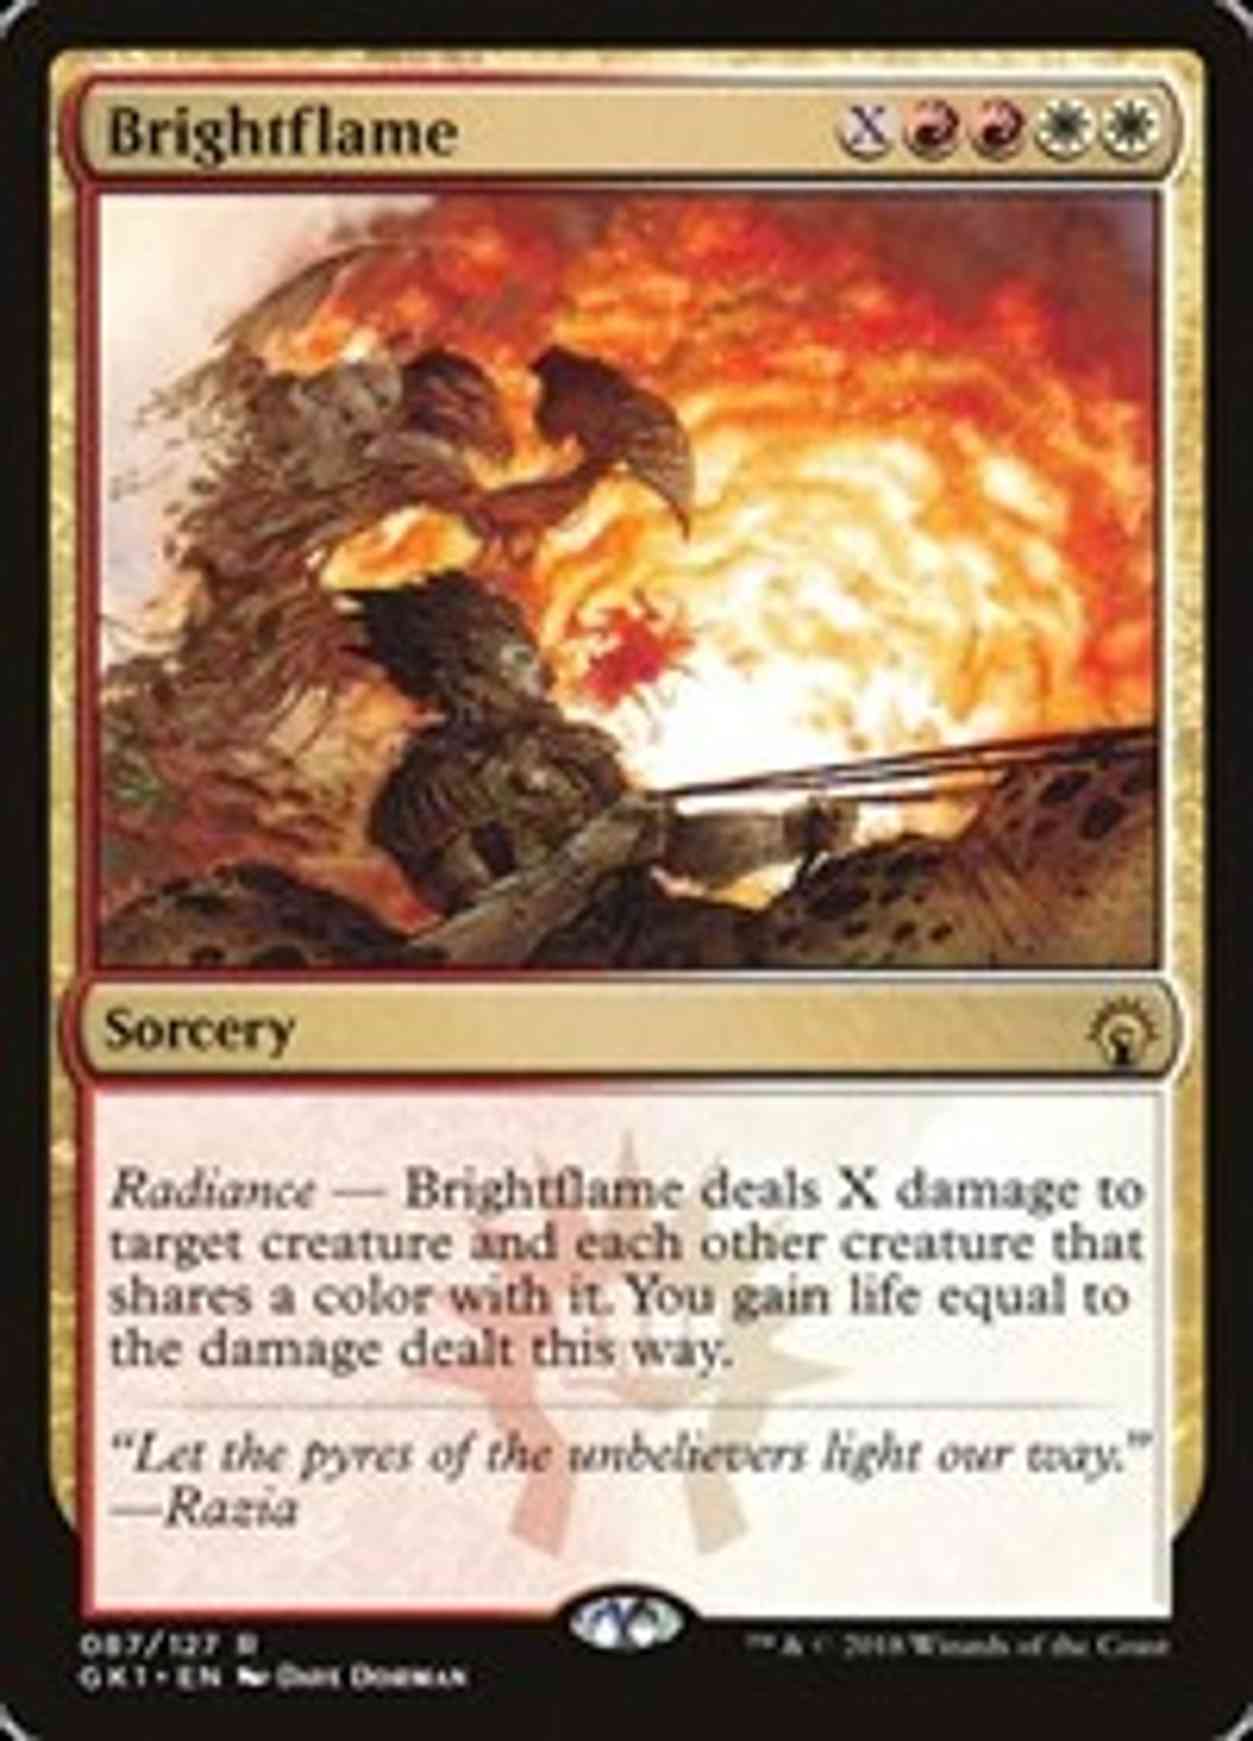 Brightflame magic card front